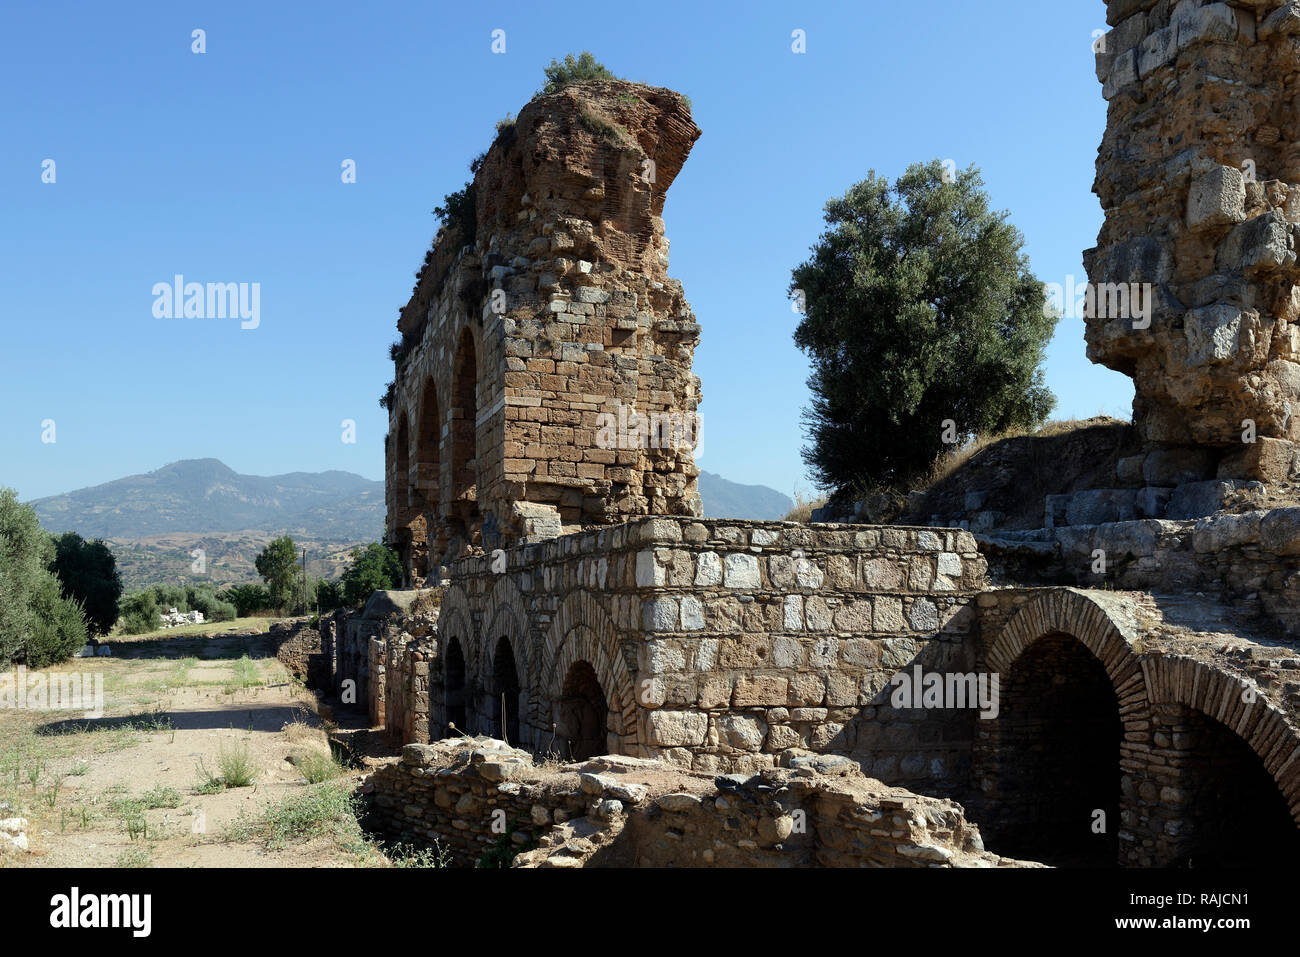 The imposing three arched structure that is part of the Bath-Gymnasium complex, ancient city of Tralleis, Aydin, Anatolia, Turkey. Dated to the 3rd ce Stock Photo